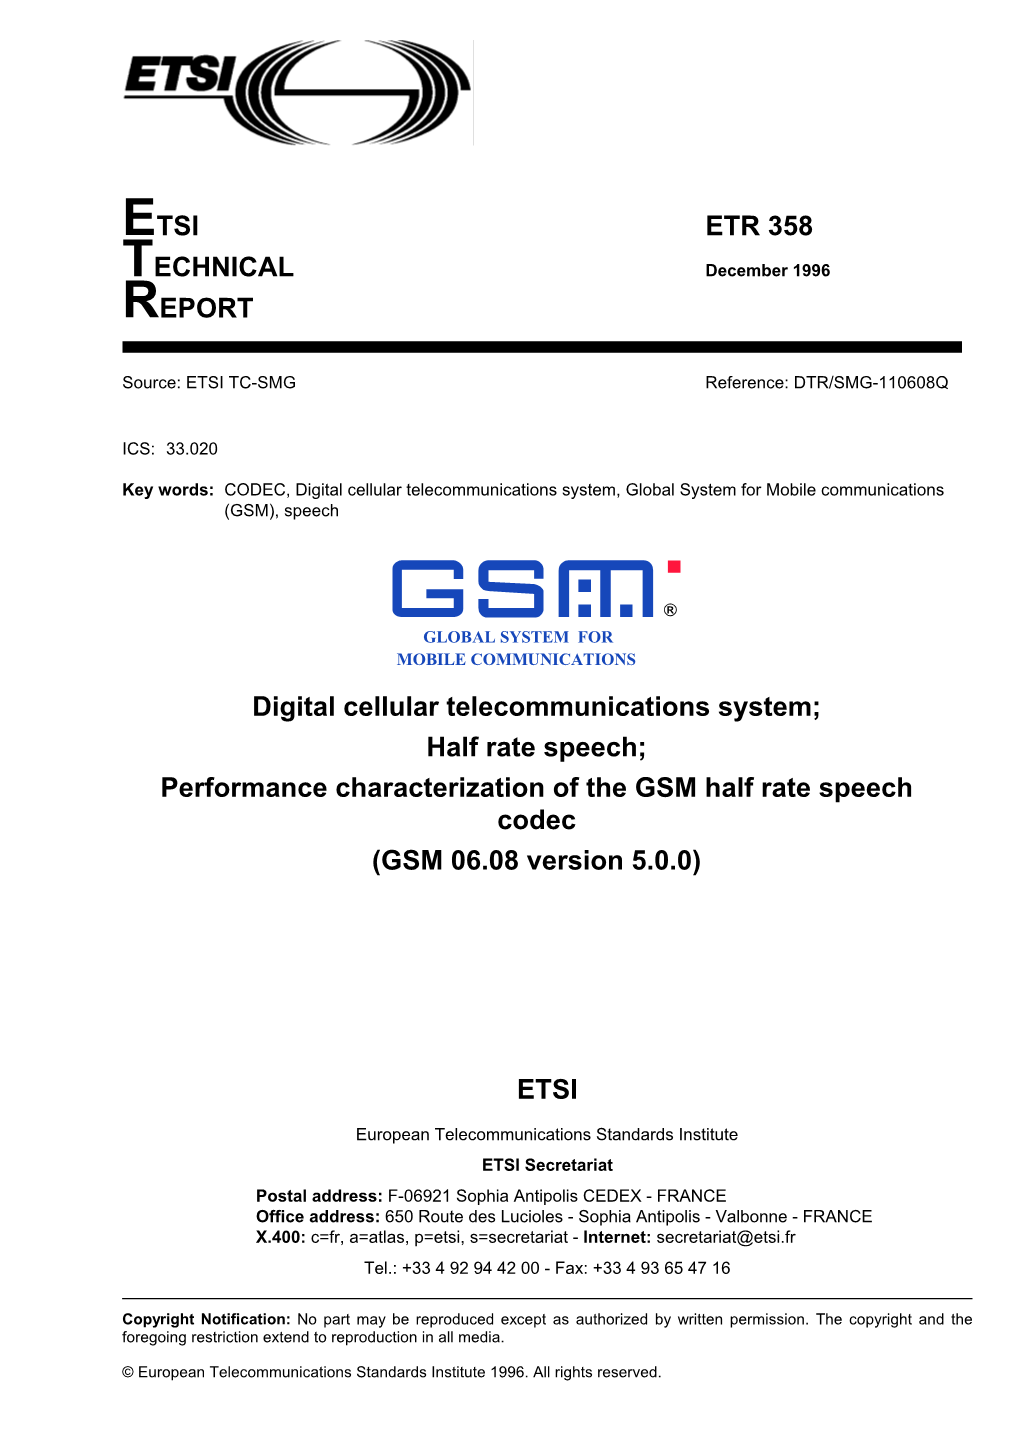 Performance Characterization of the GSM Half Rate Speech Codec (GSM 06.08 Version 5.0.0)